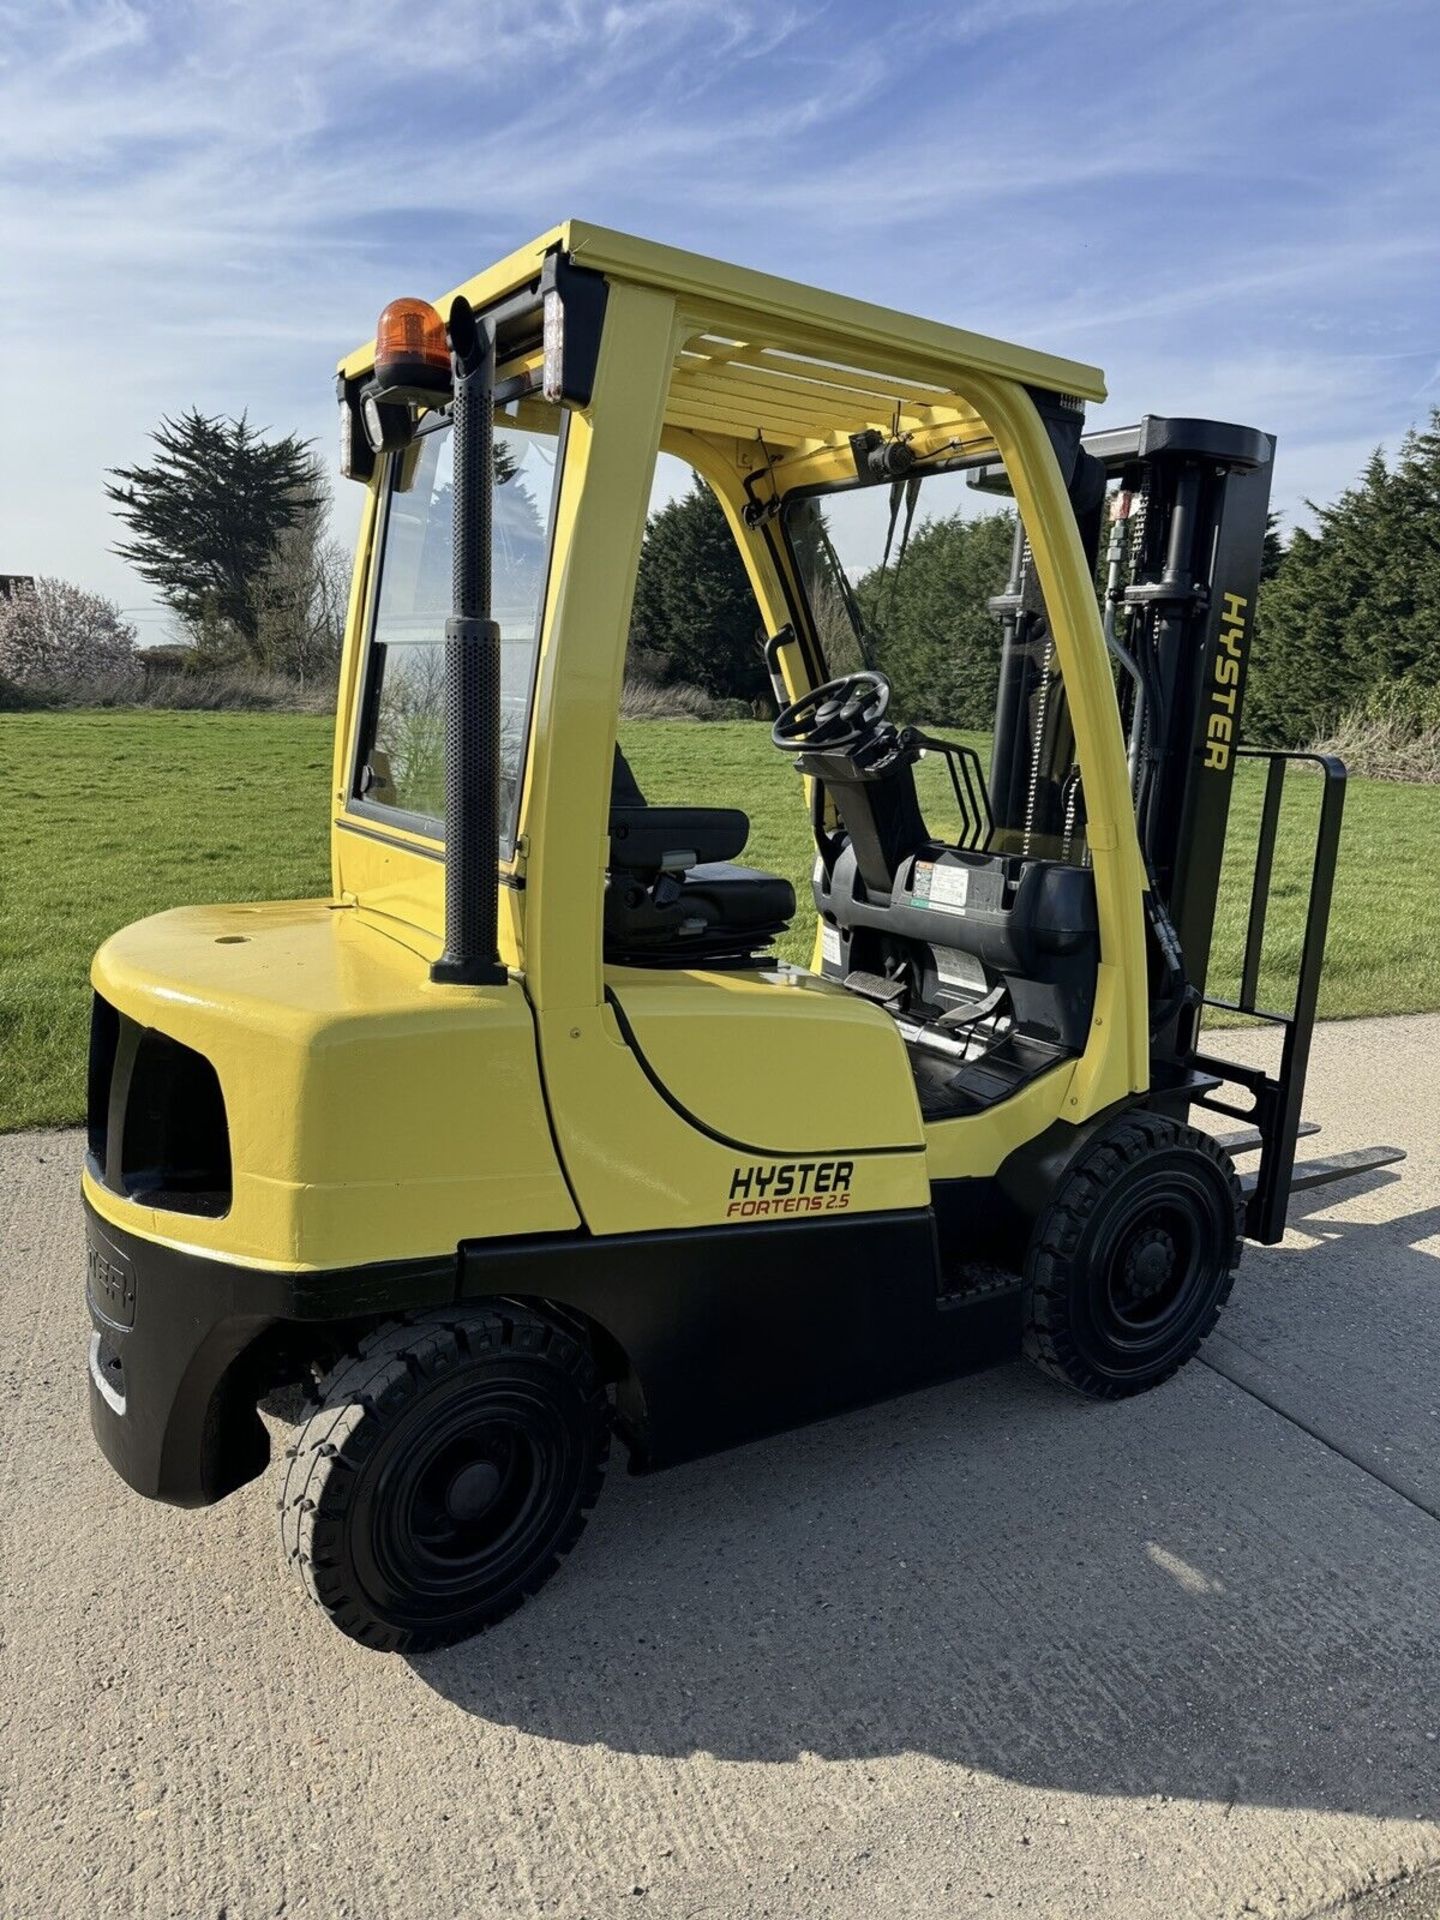 HYSTER, 2.5 Tonne Diesel Forklift (Container Spec) - Image 2 of 5